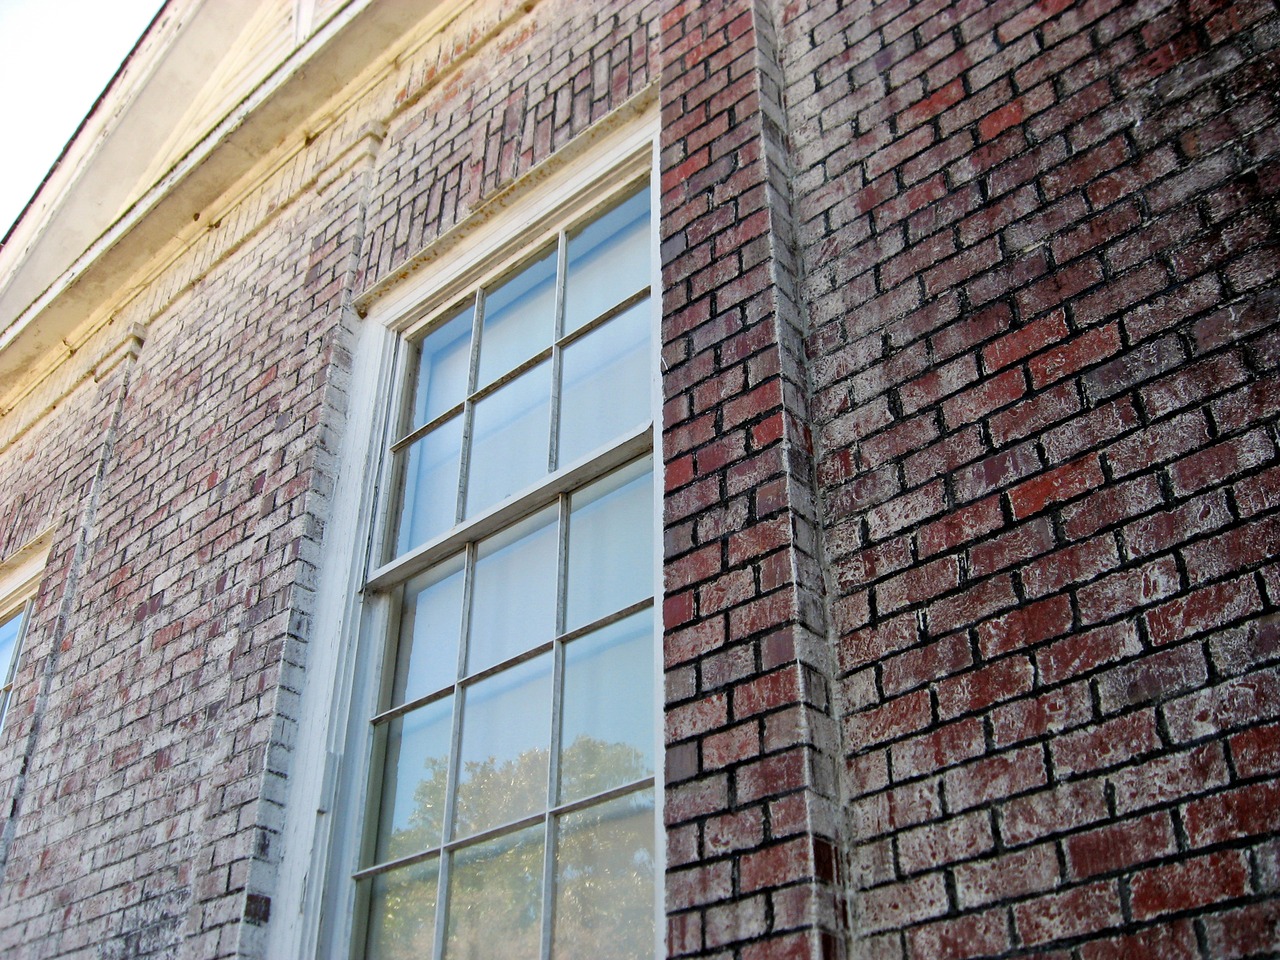 Window and brick exterior wall of the main house's east wing (1914) at Pebble Hill Plantation.